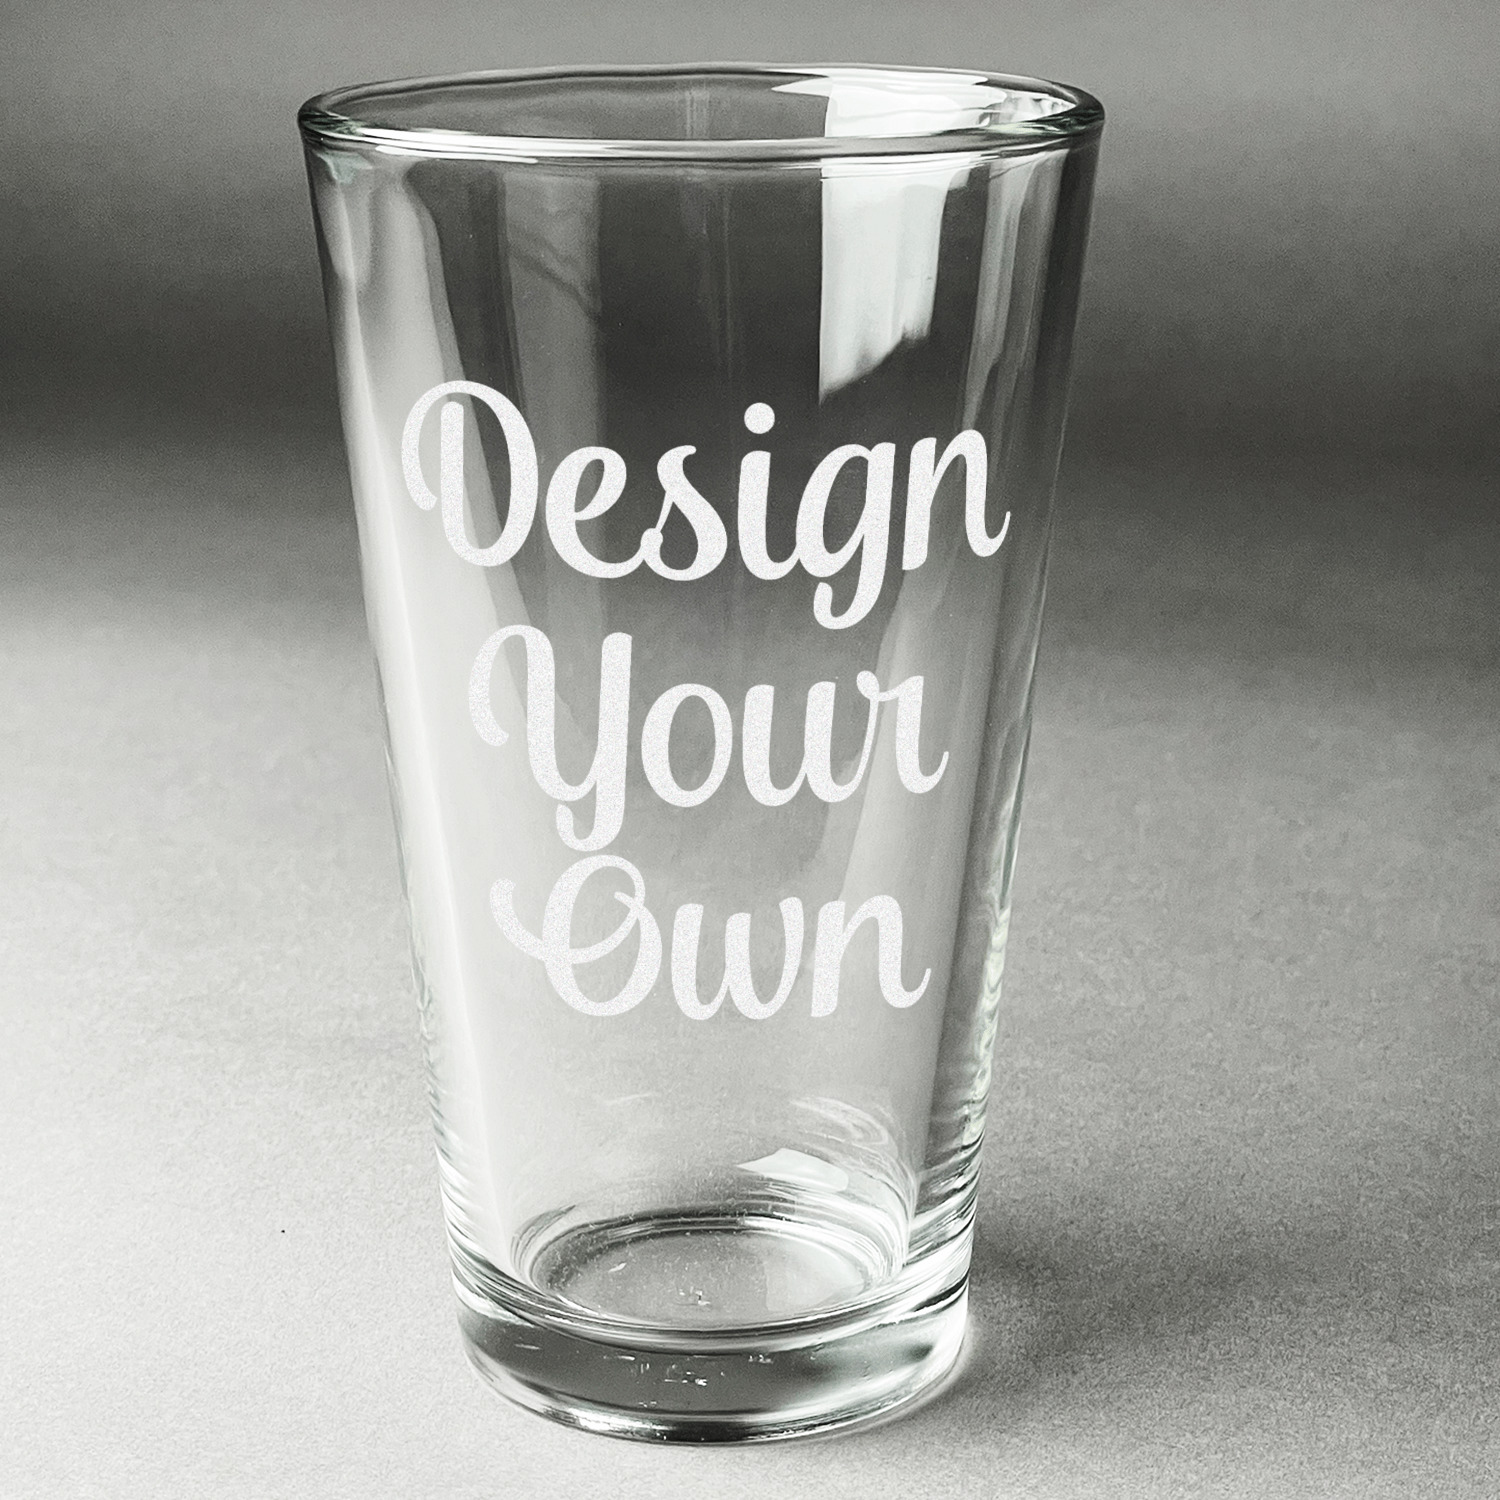 https://www.youcustomizeit.com/common/MAKE/965833/Design-Your-Own-Pint-Glasses-Main-Approval.jpg?lm=1666124877